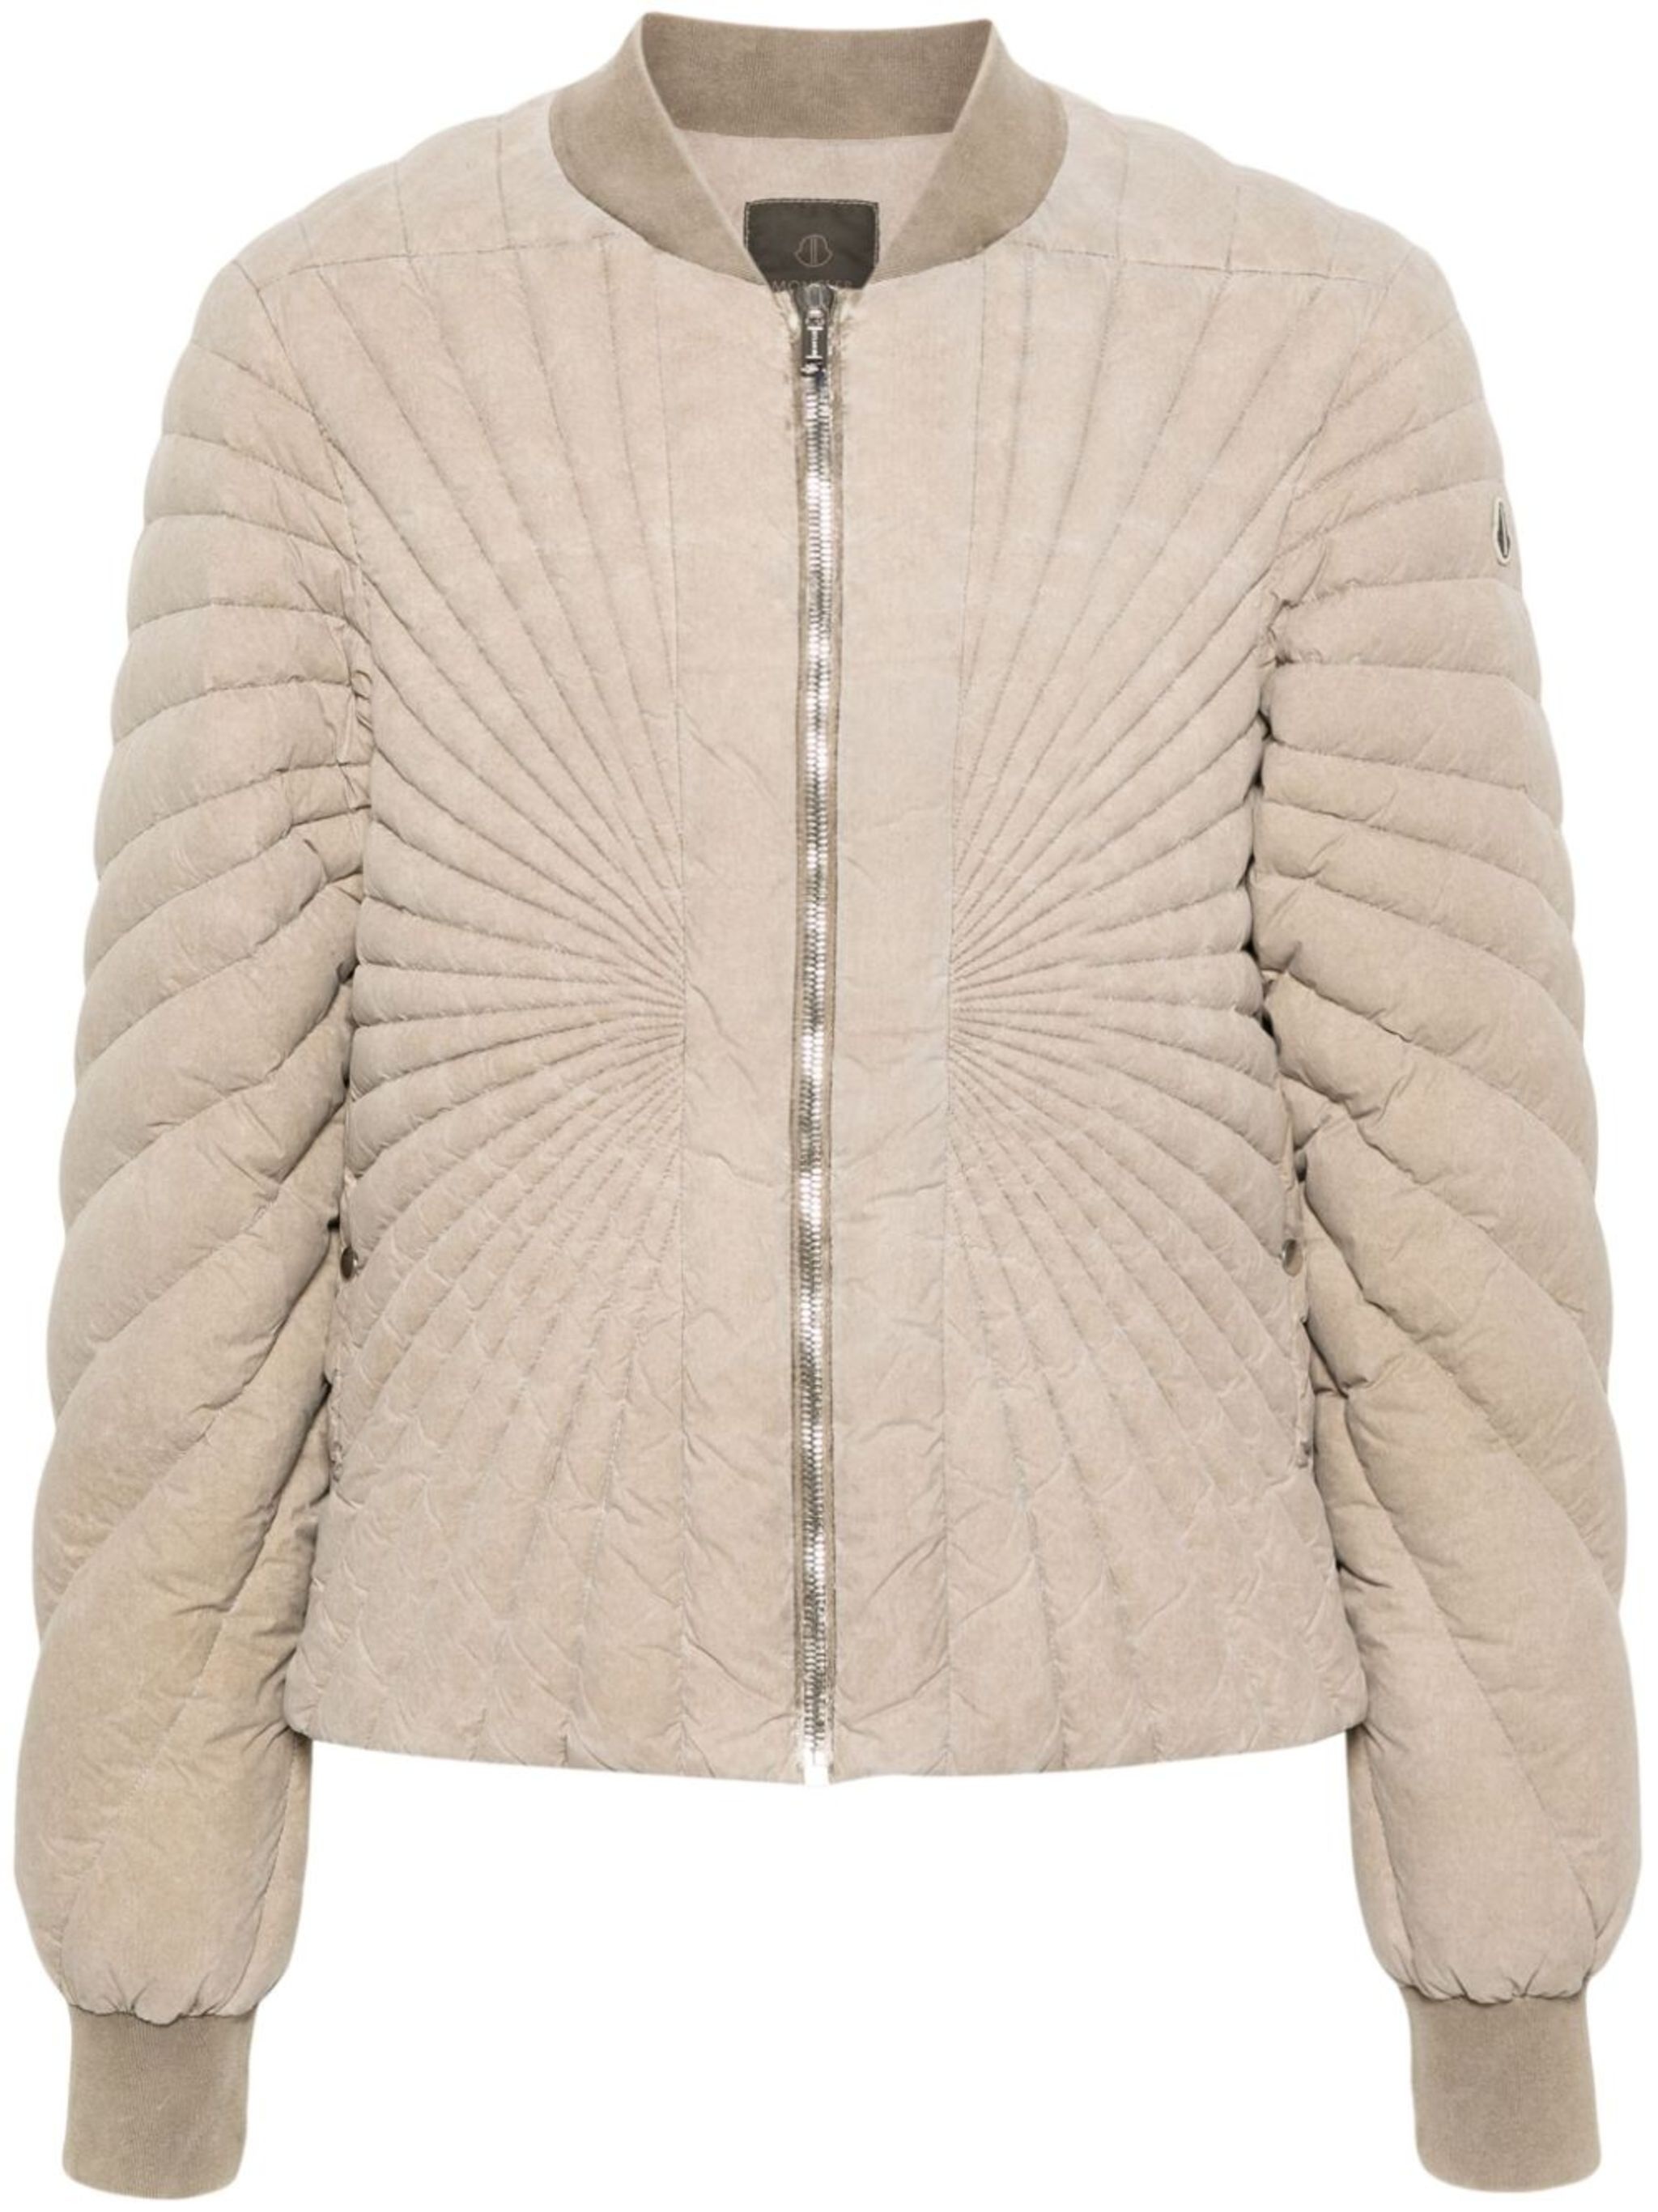 x Rick Owens Radiance Flight quilted bomber jacket - 1